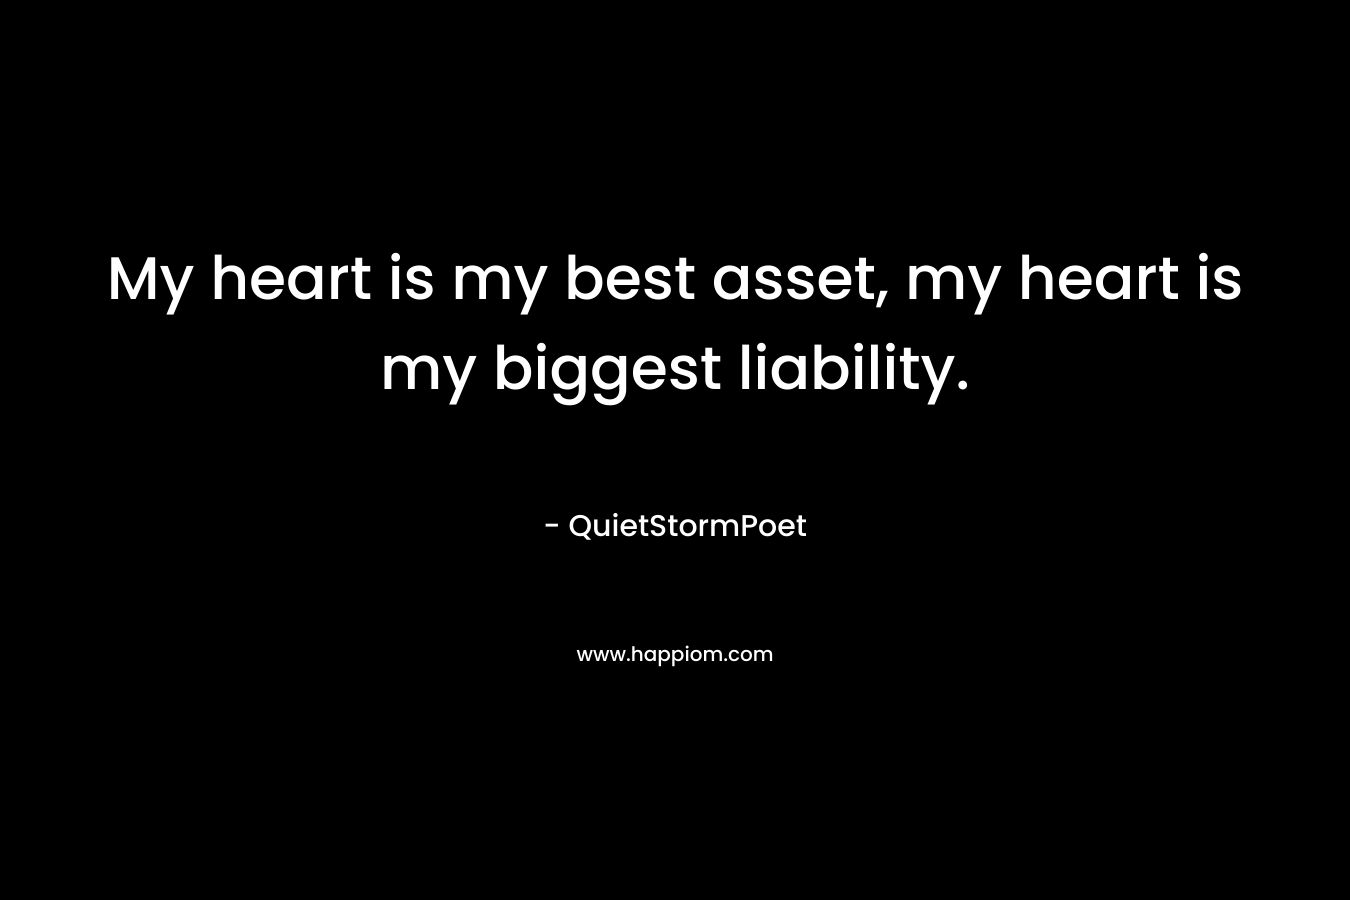 My heart is my best asset, my heart is my biggest liability.